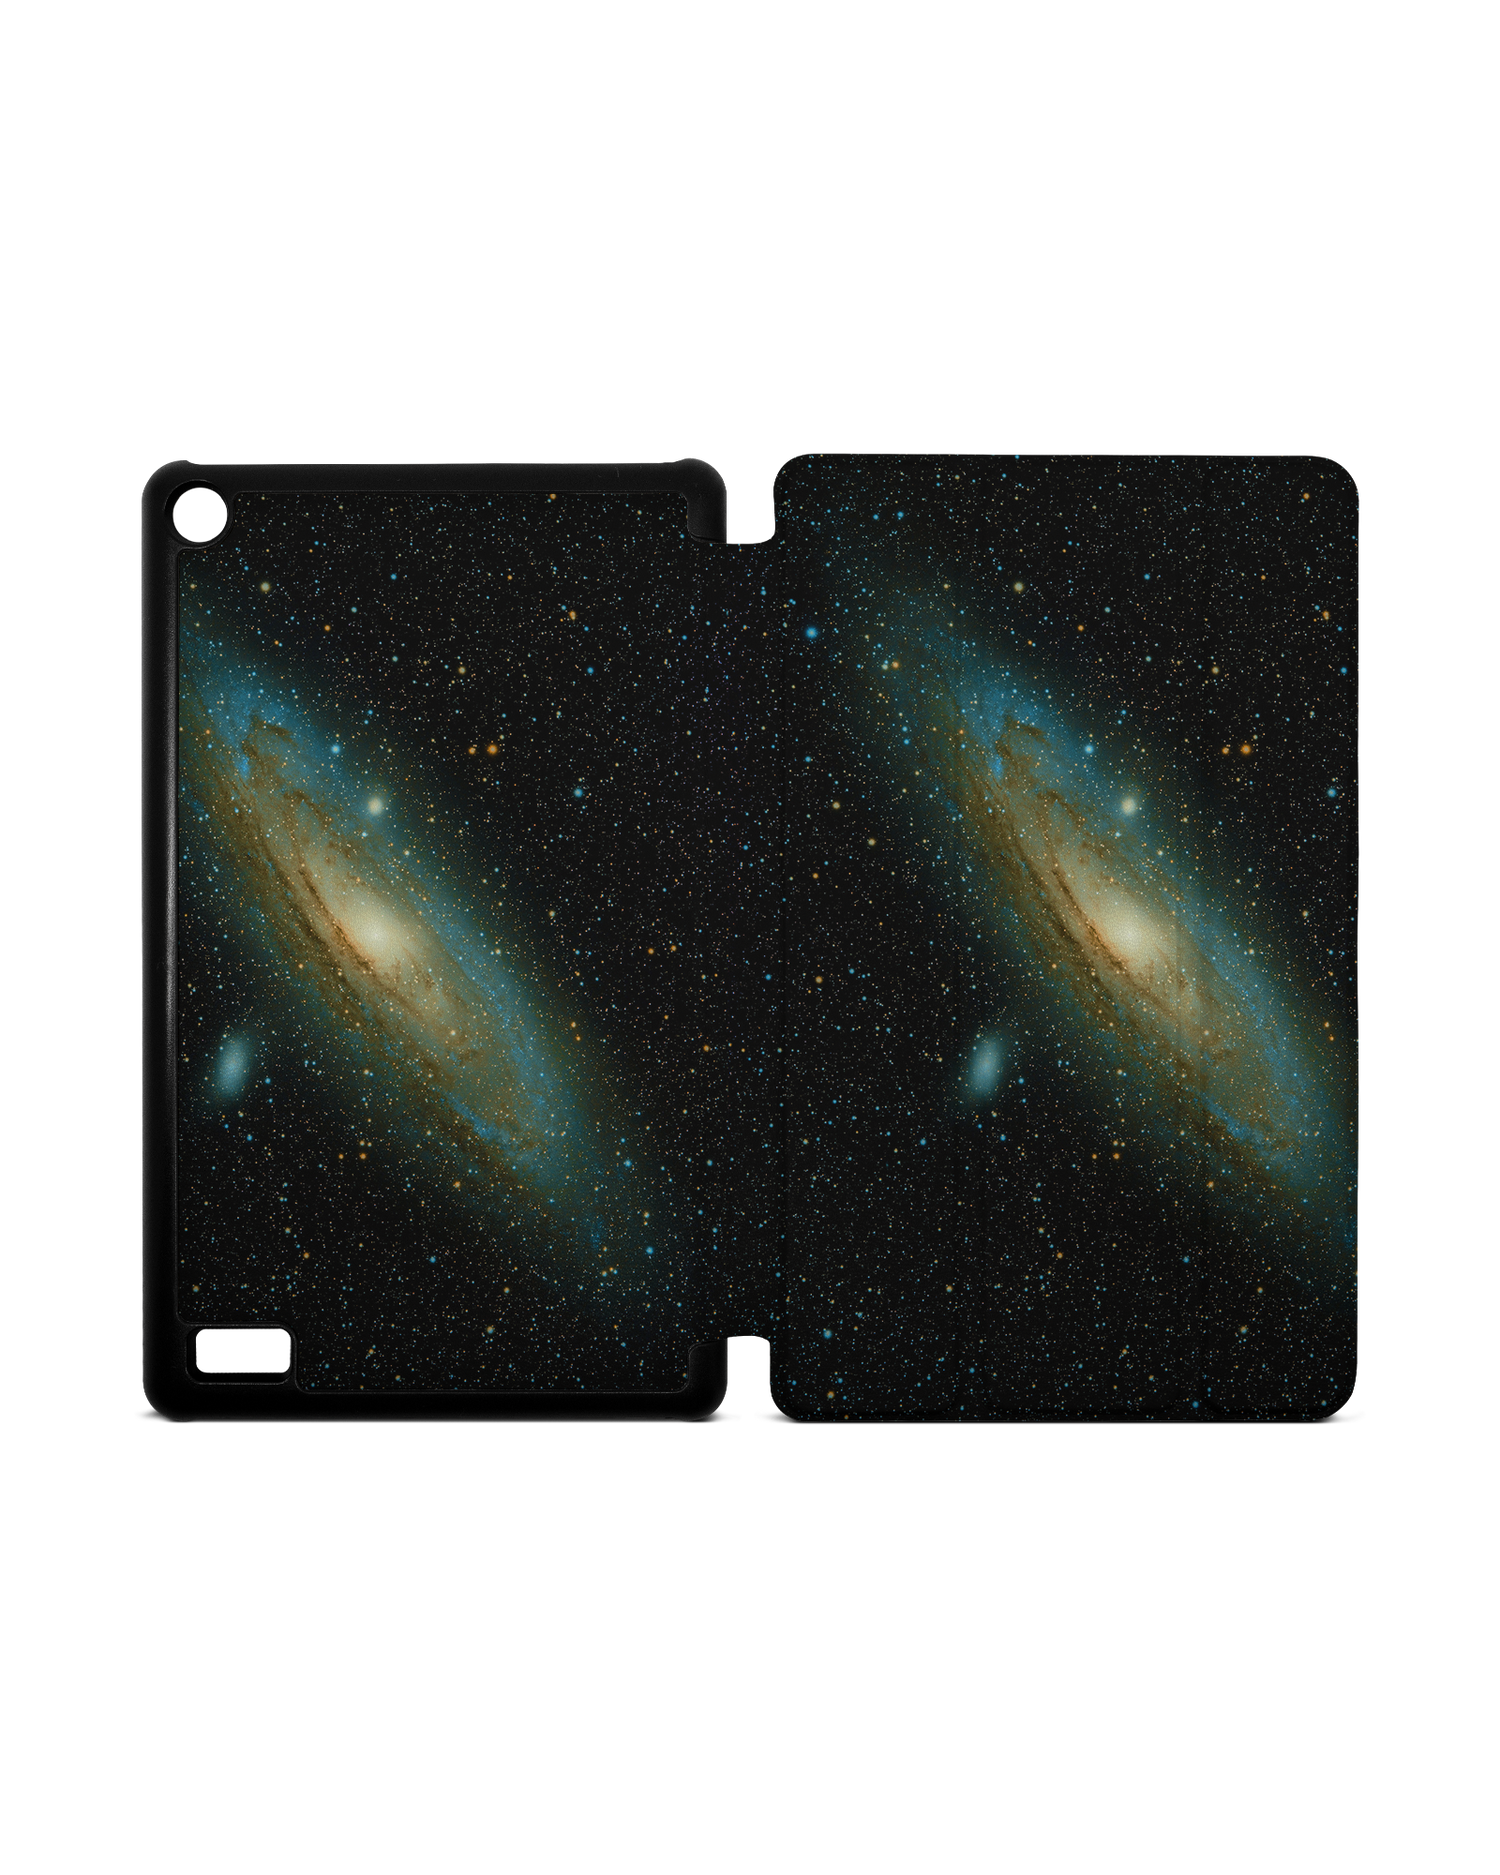 Outer Space Tablet Smart Case for Amazon Fire 7: Opened